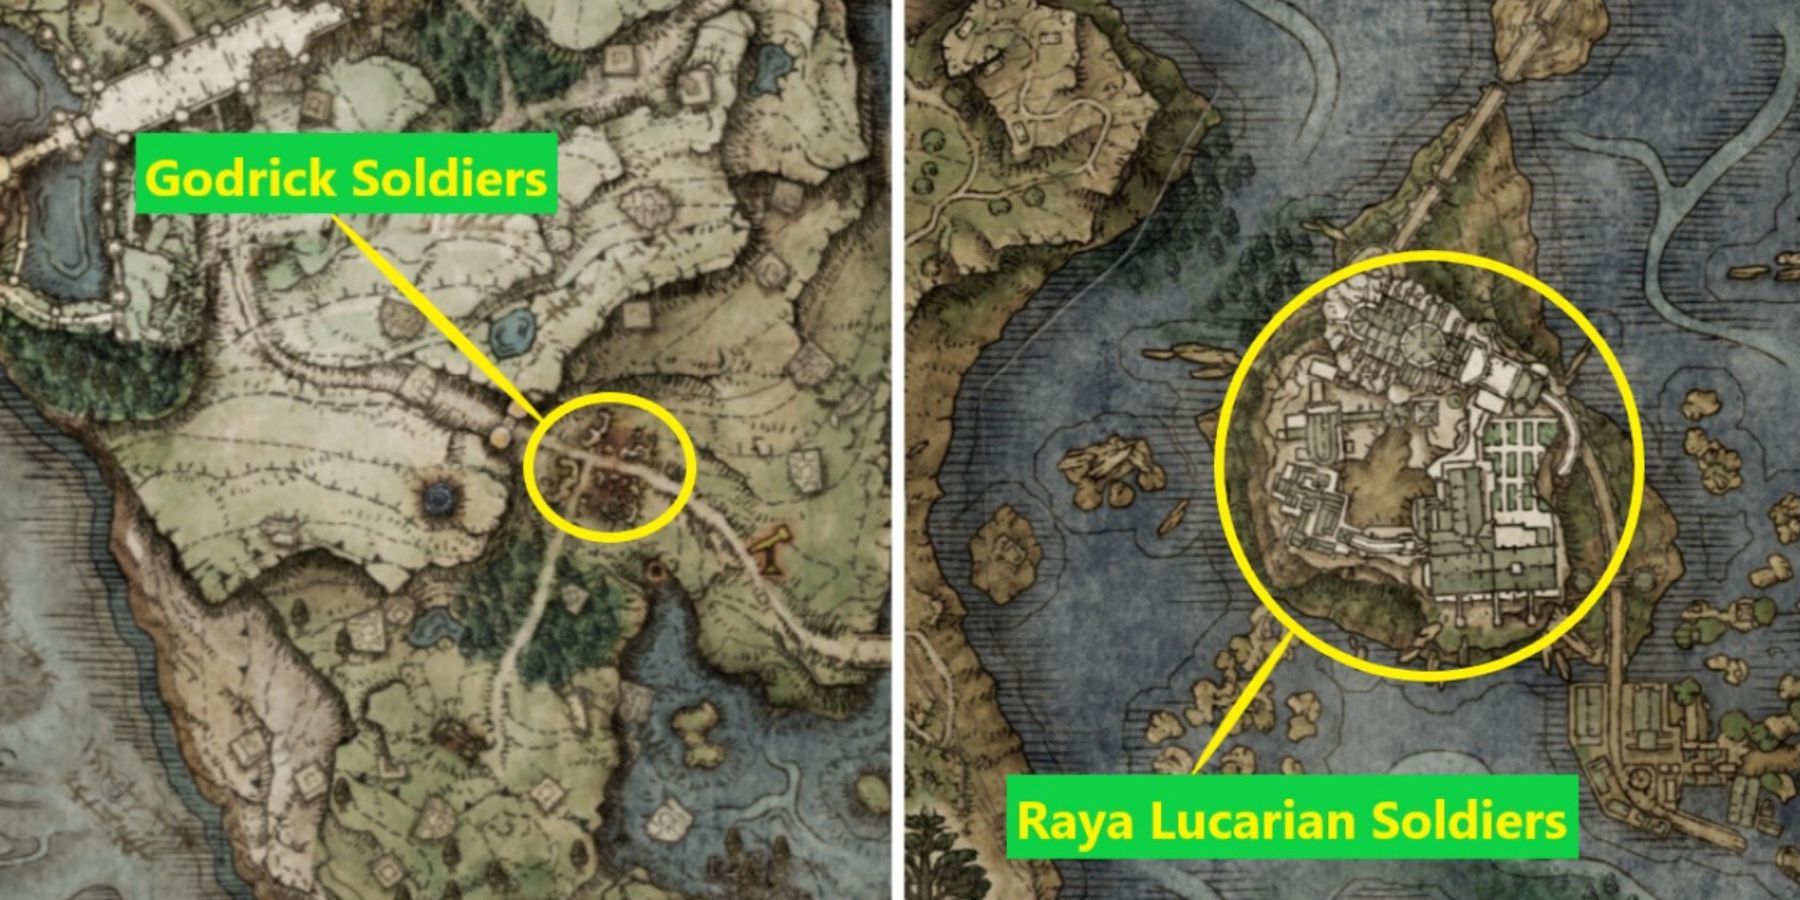 Elden Ring: Godrick Soldiers and Raya Lucaria Soldiers location on the map